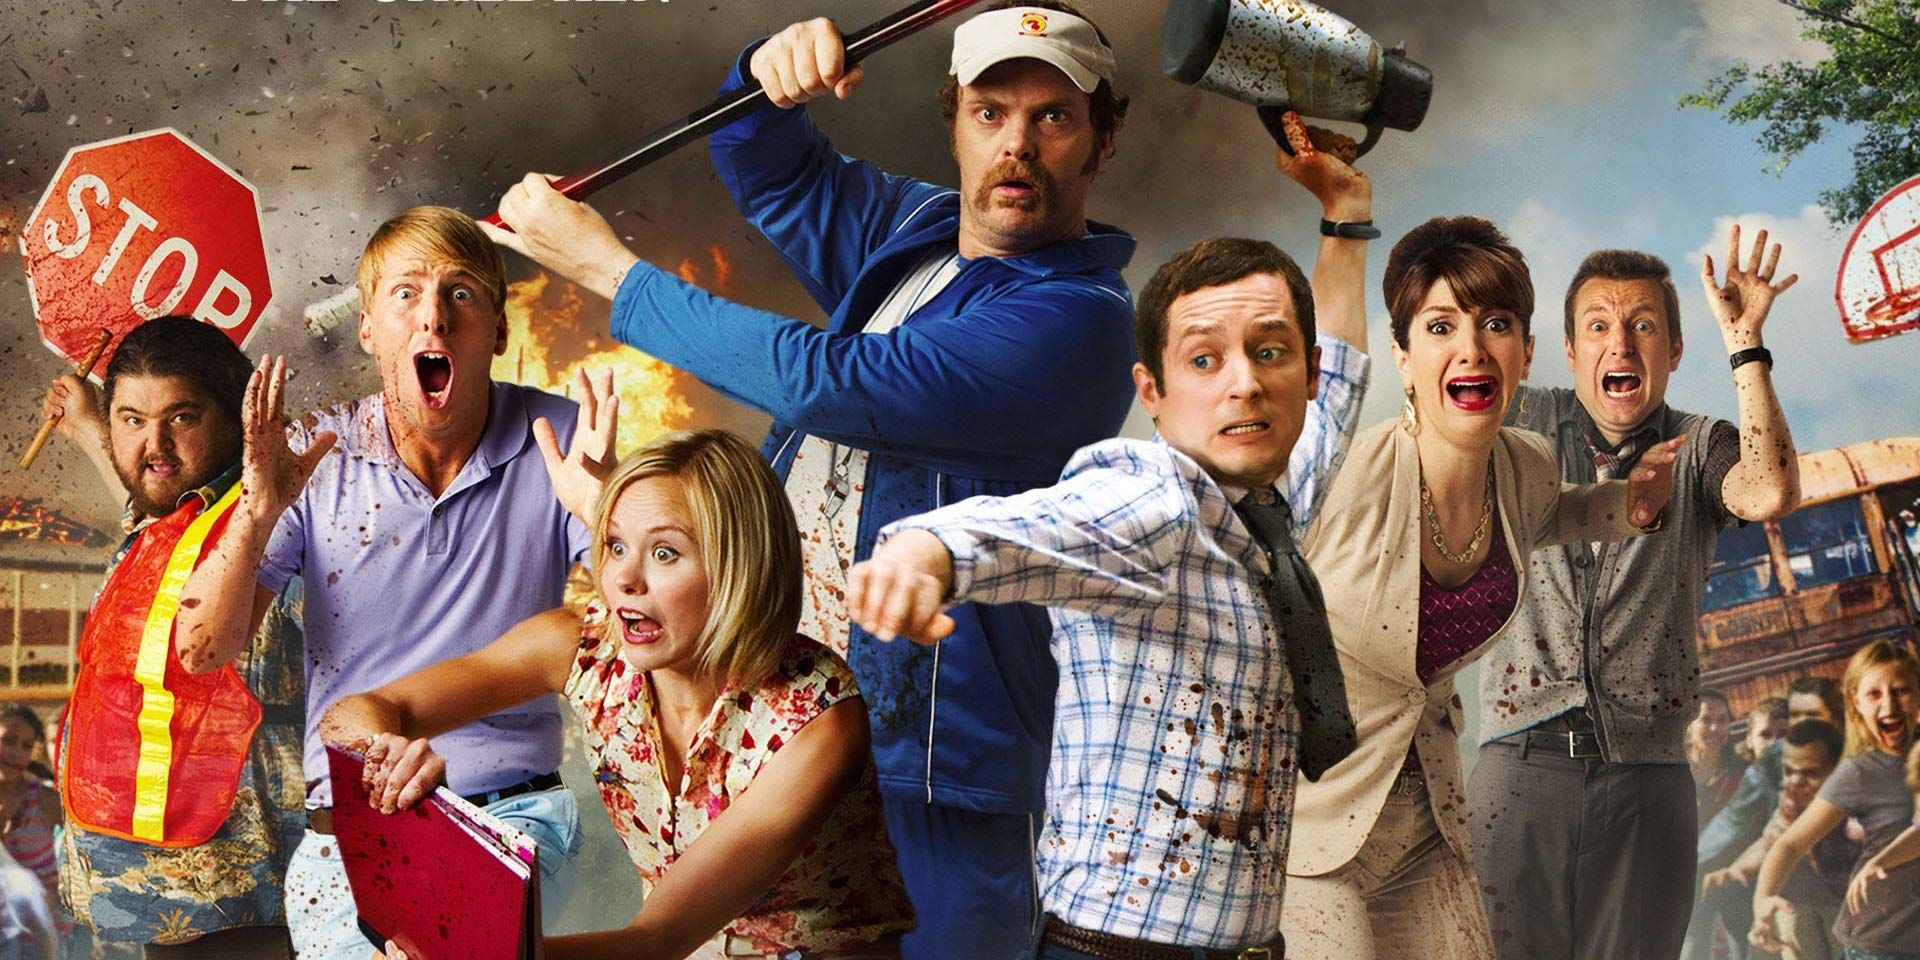 The cast of Cooties screaming and brandishing weapons on the poster